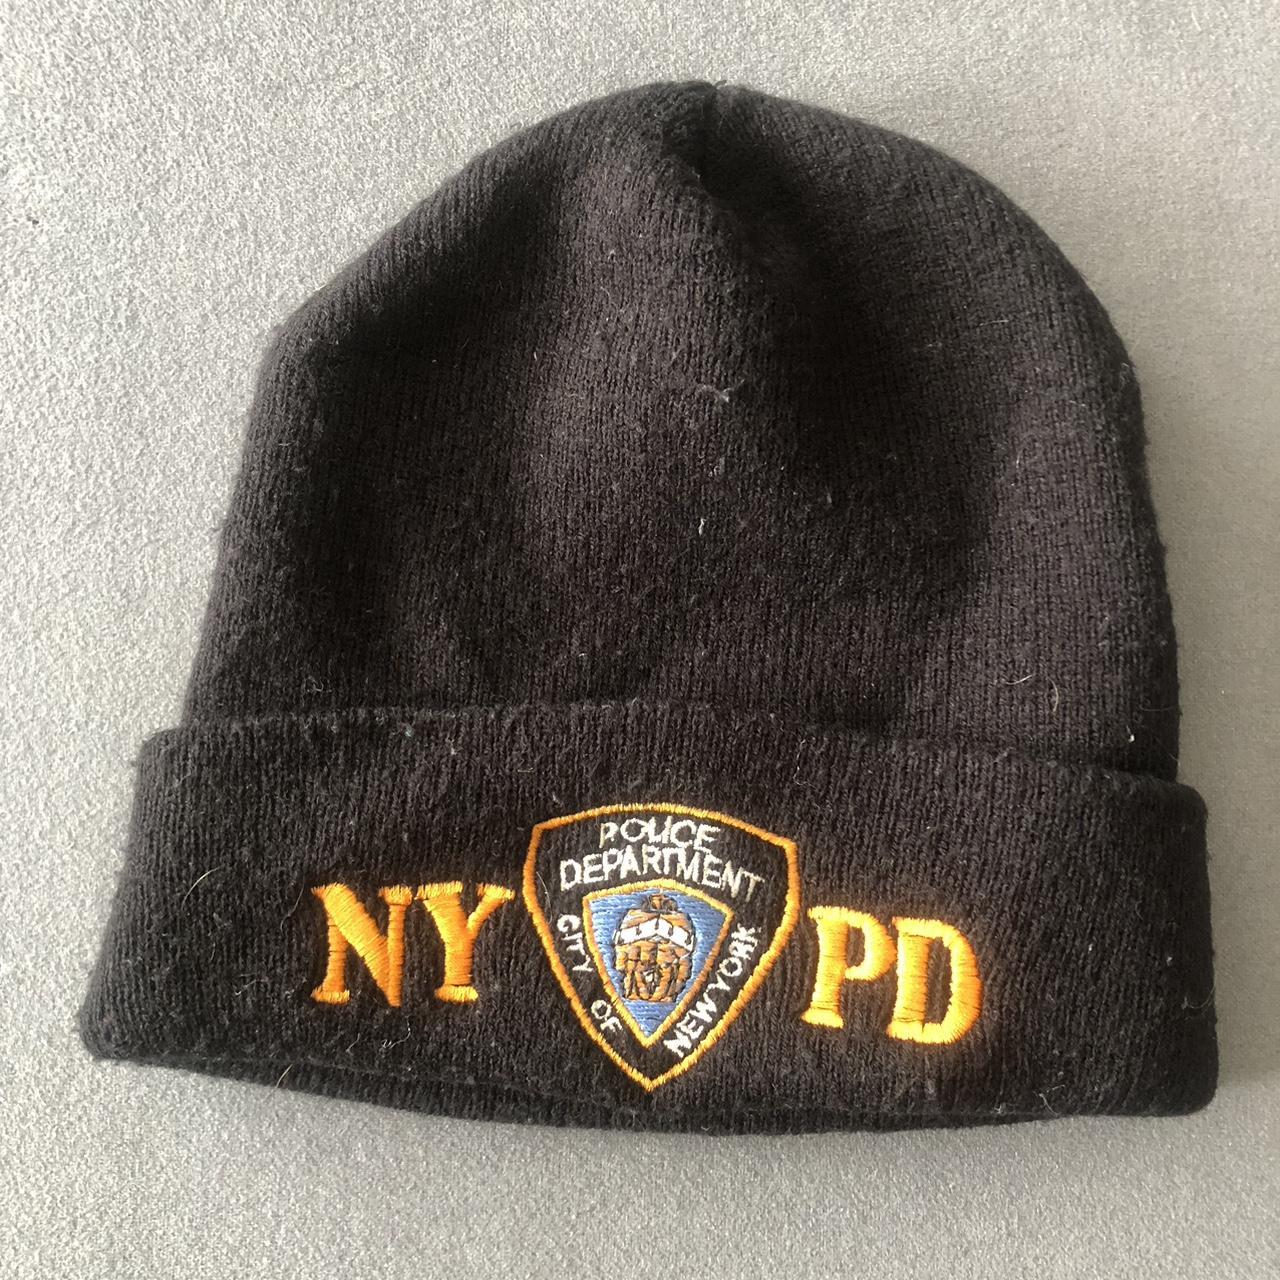 NYPD police department hat No fade great - Depop